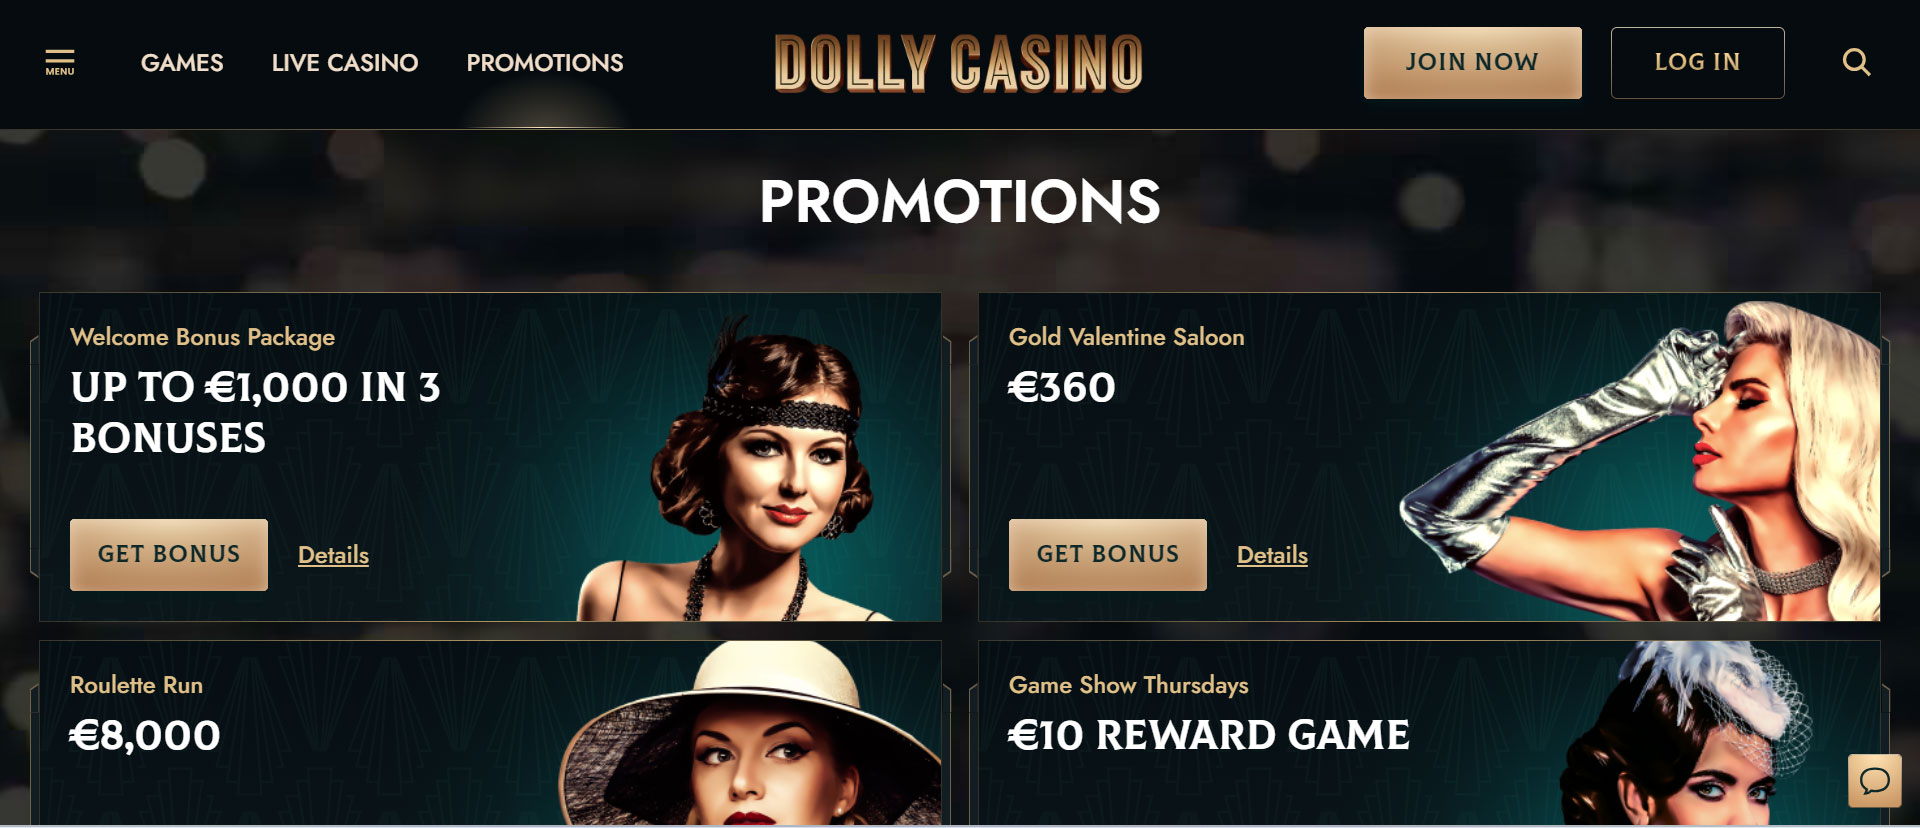 Dolly Casino Promotions